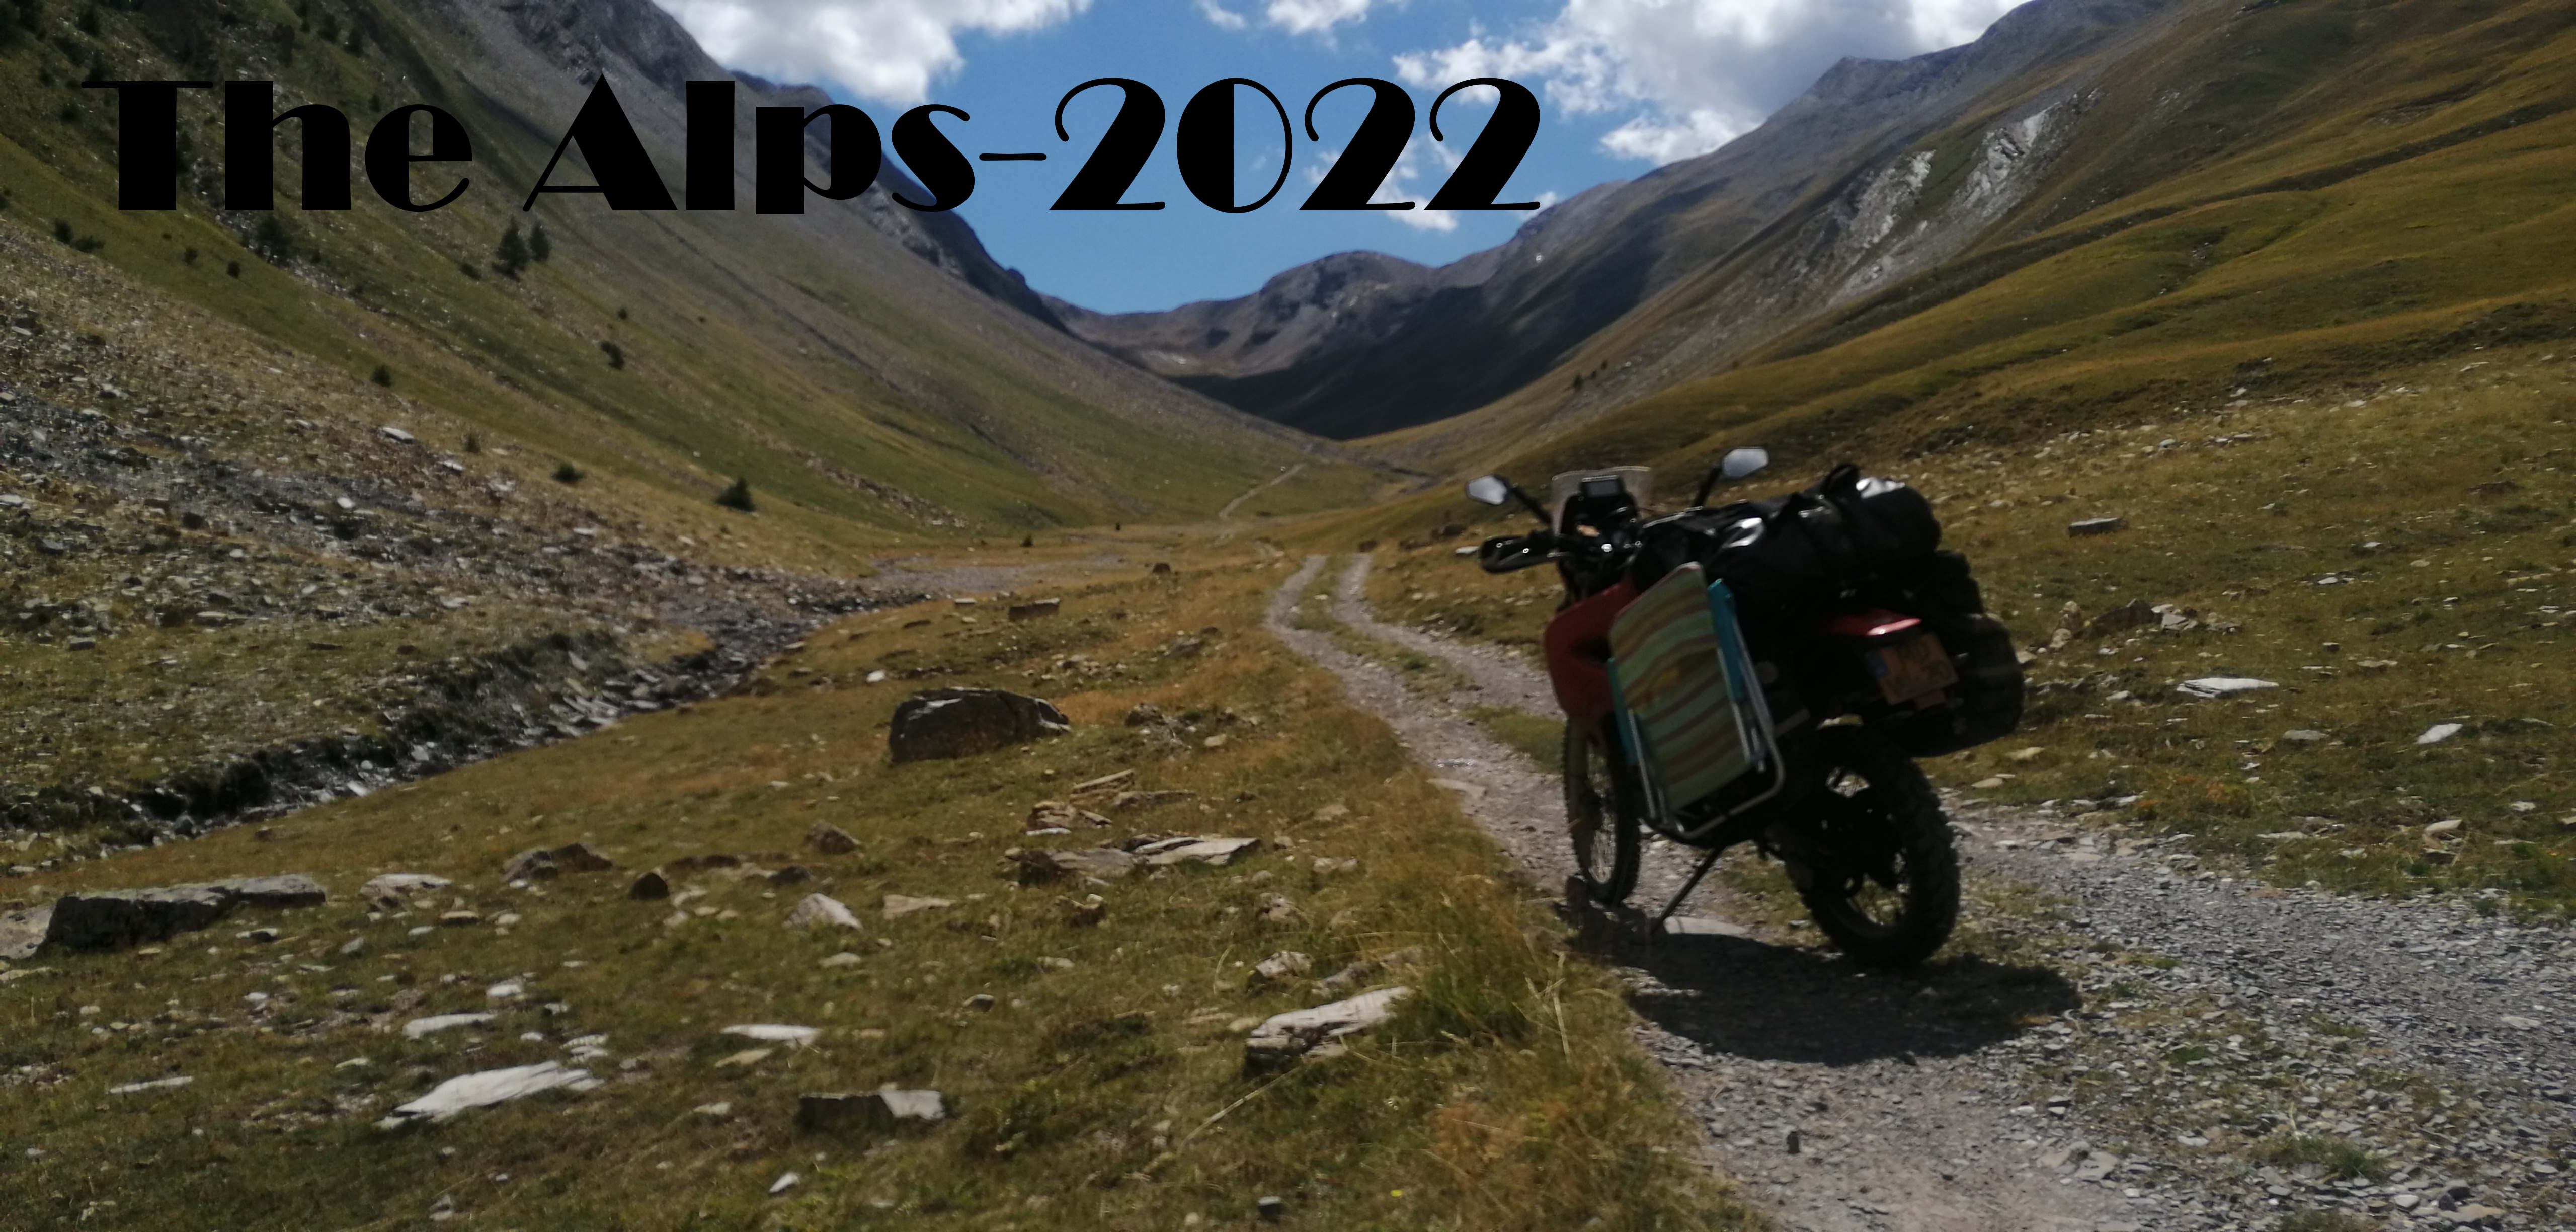 thealps-2022